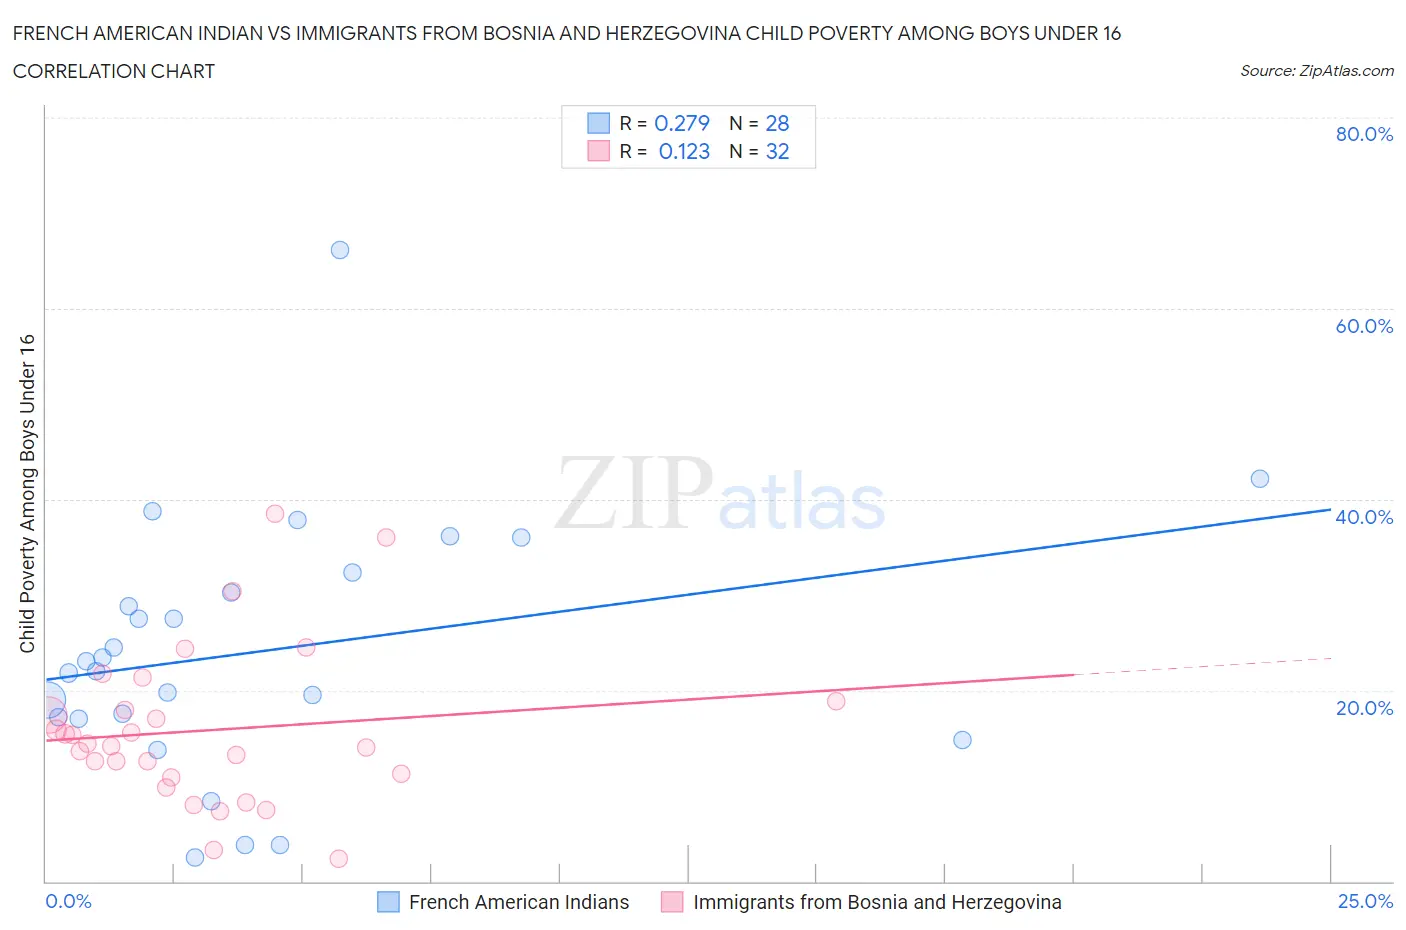 French American Indian vs Immigrants from Bosnia and Herzegovina Child Poverty Among Boys Under 16